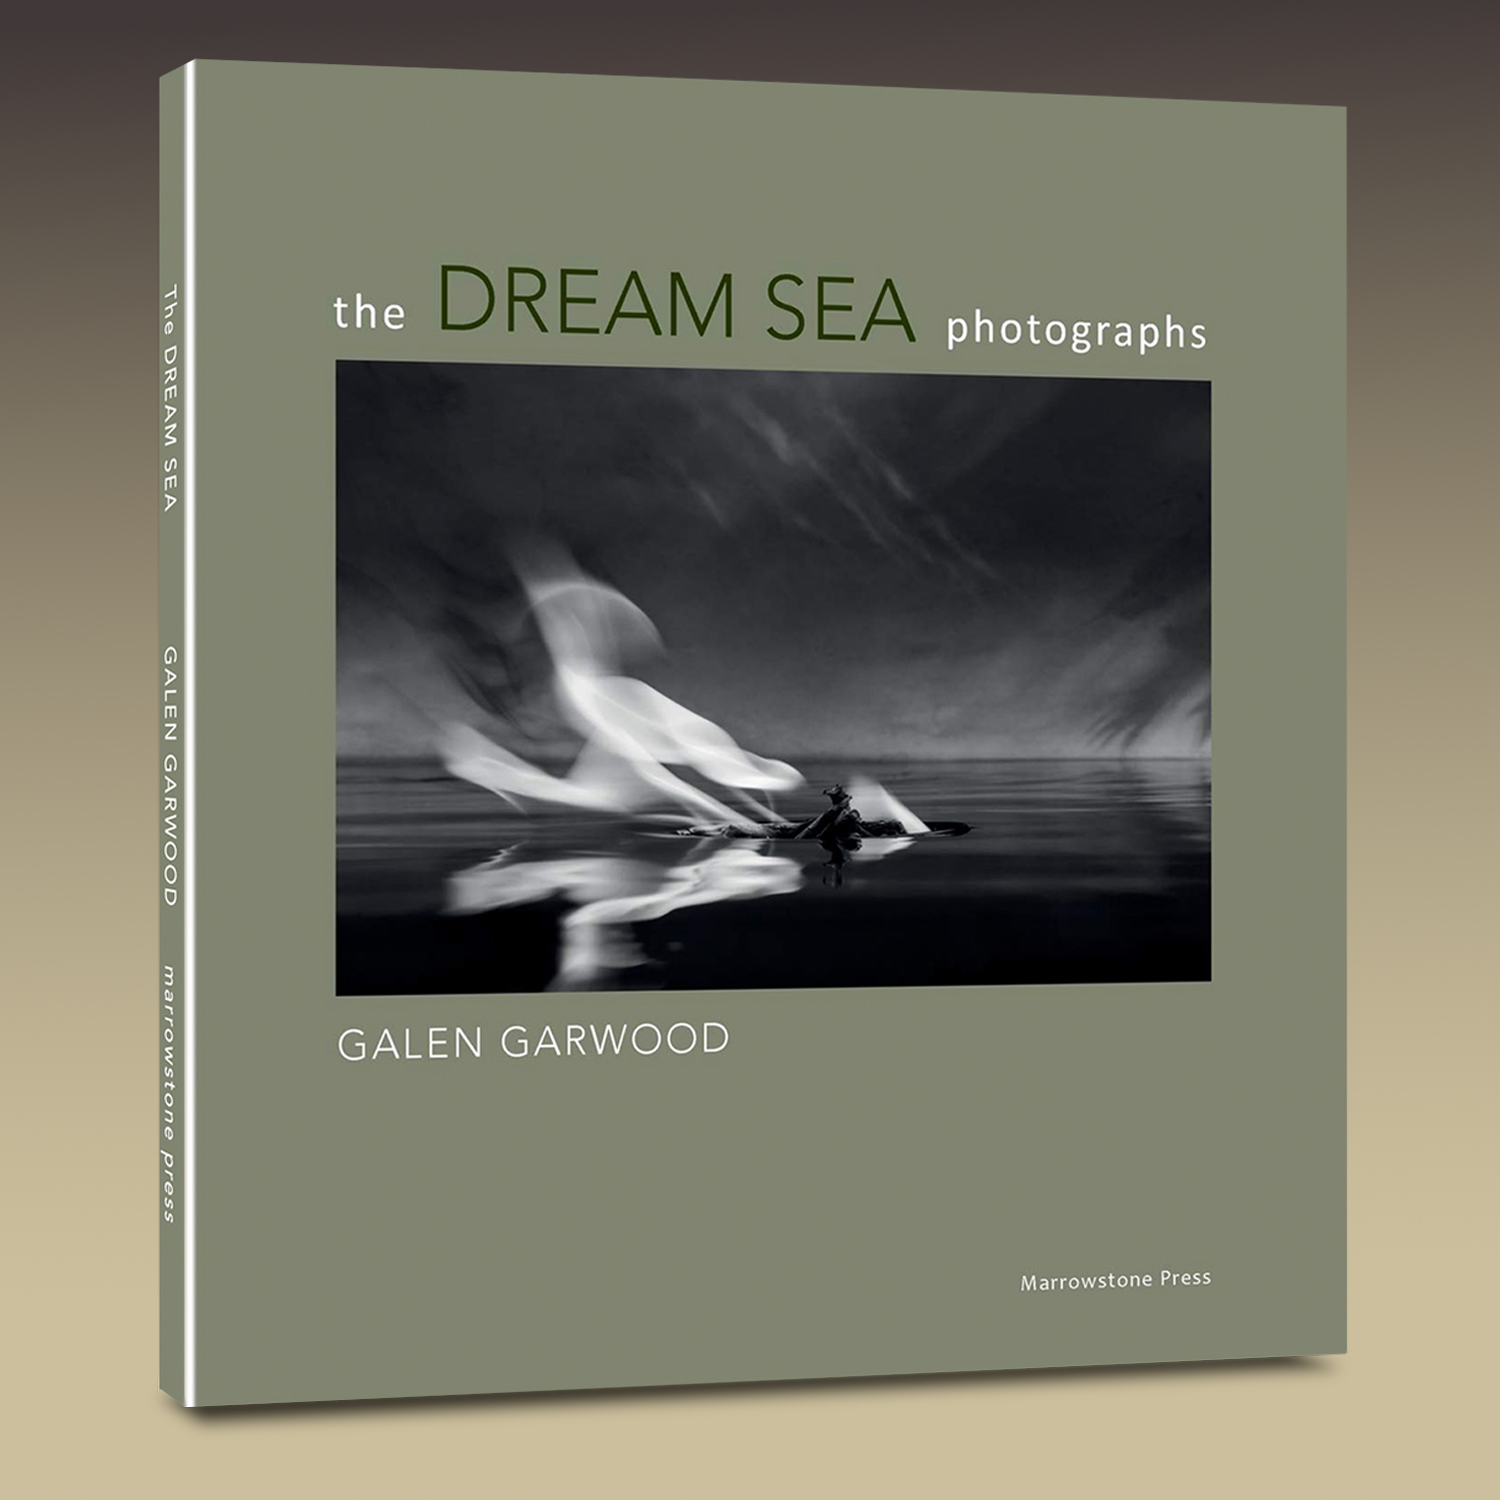 The Dream Sea a book of photographs by Galen Garwood